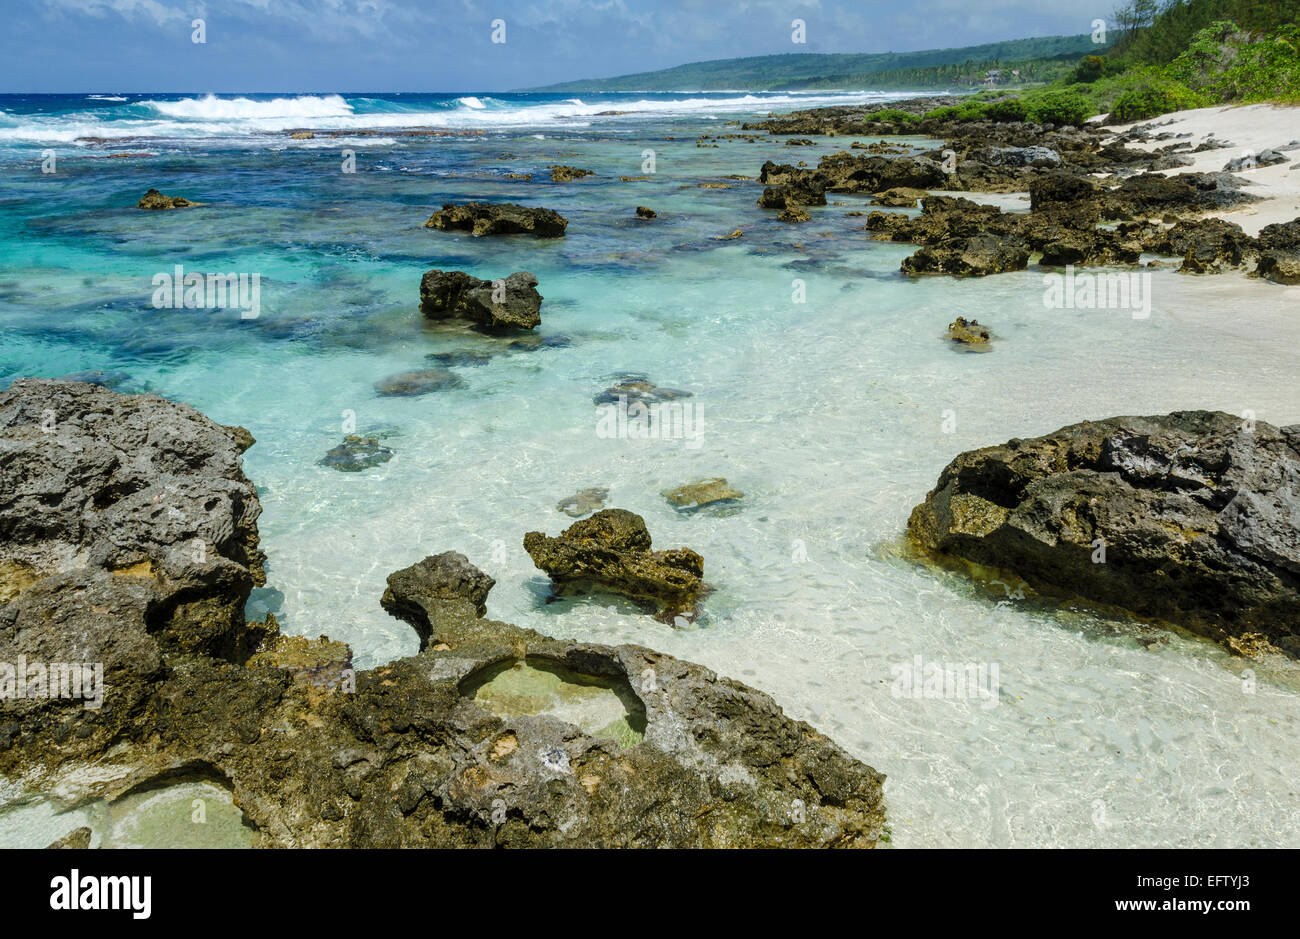 Reef protected beach on tropical island. Stock Photo